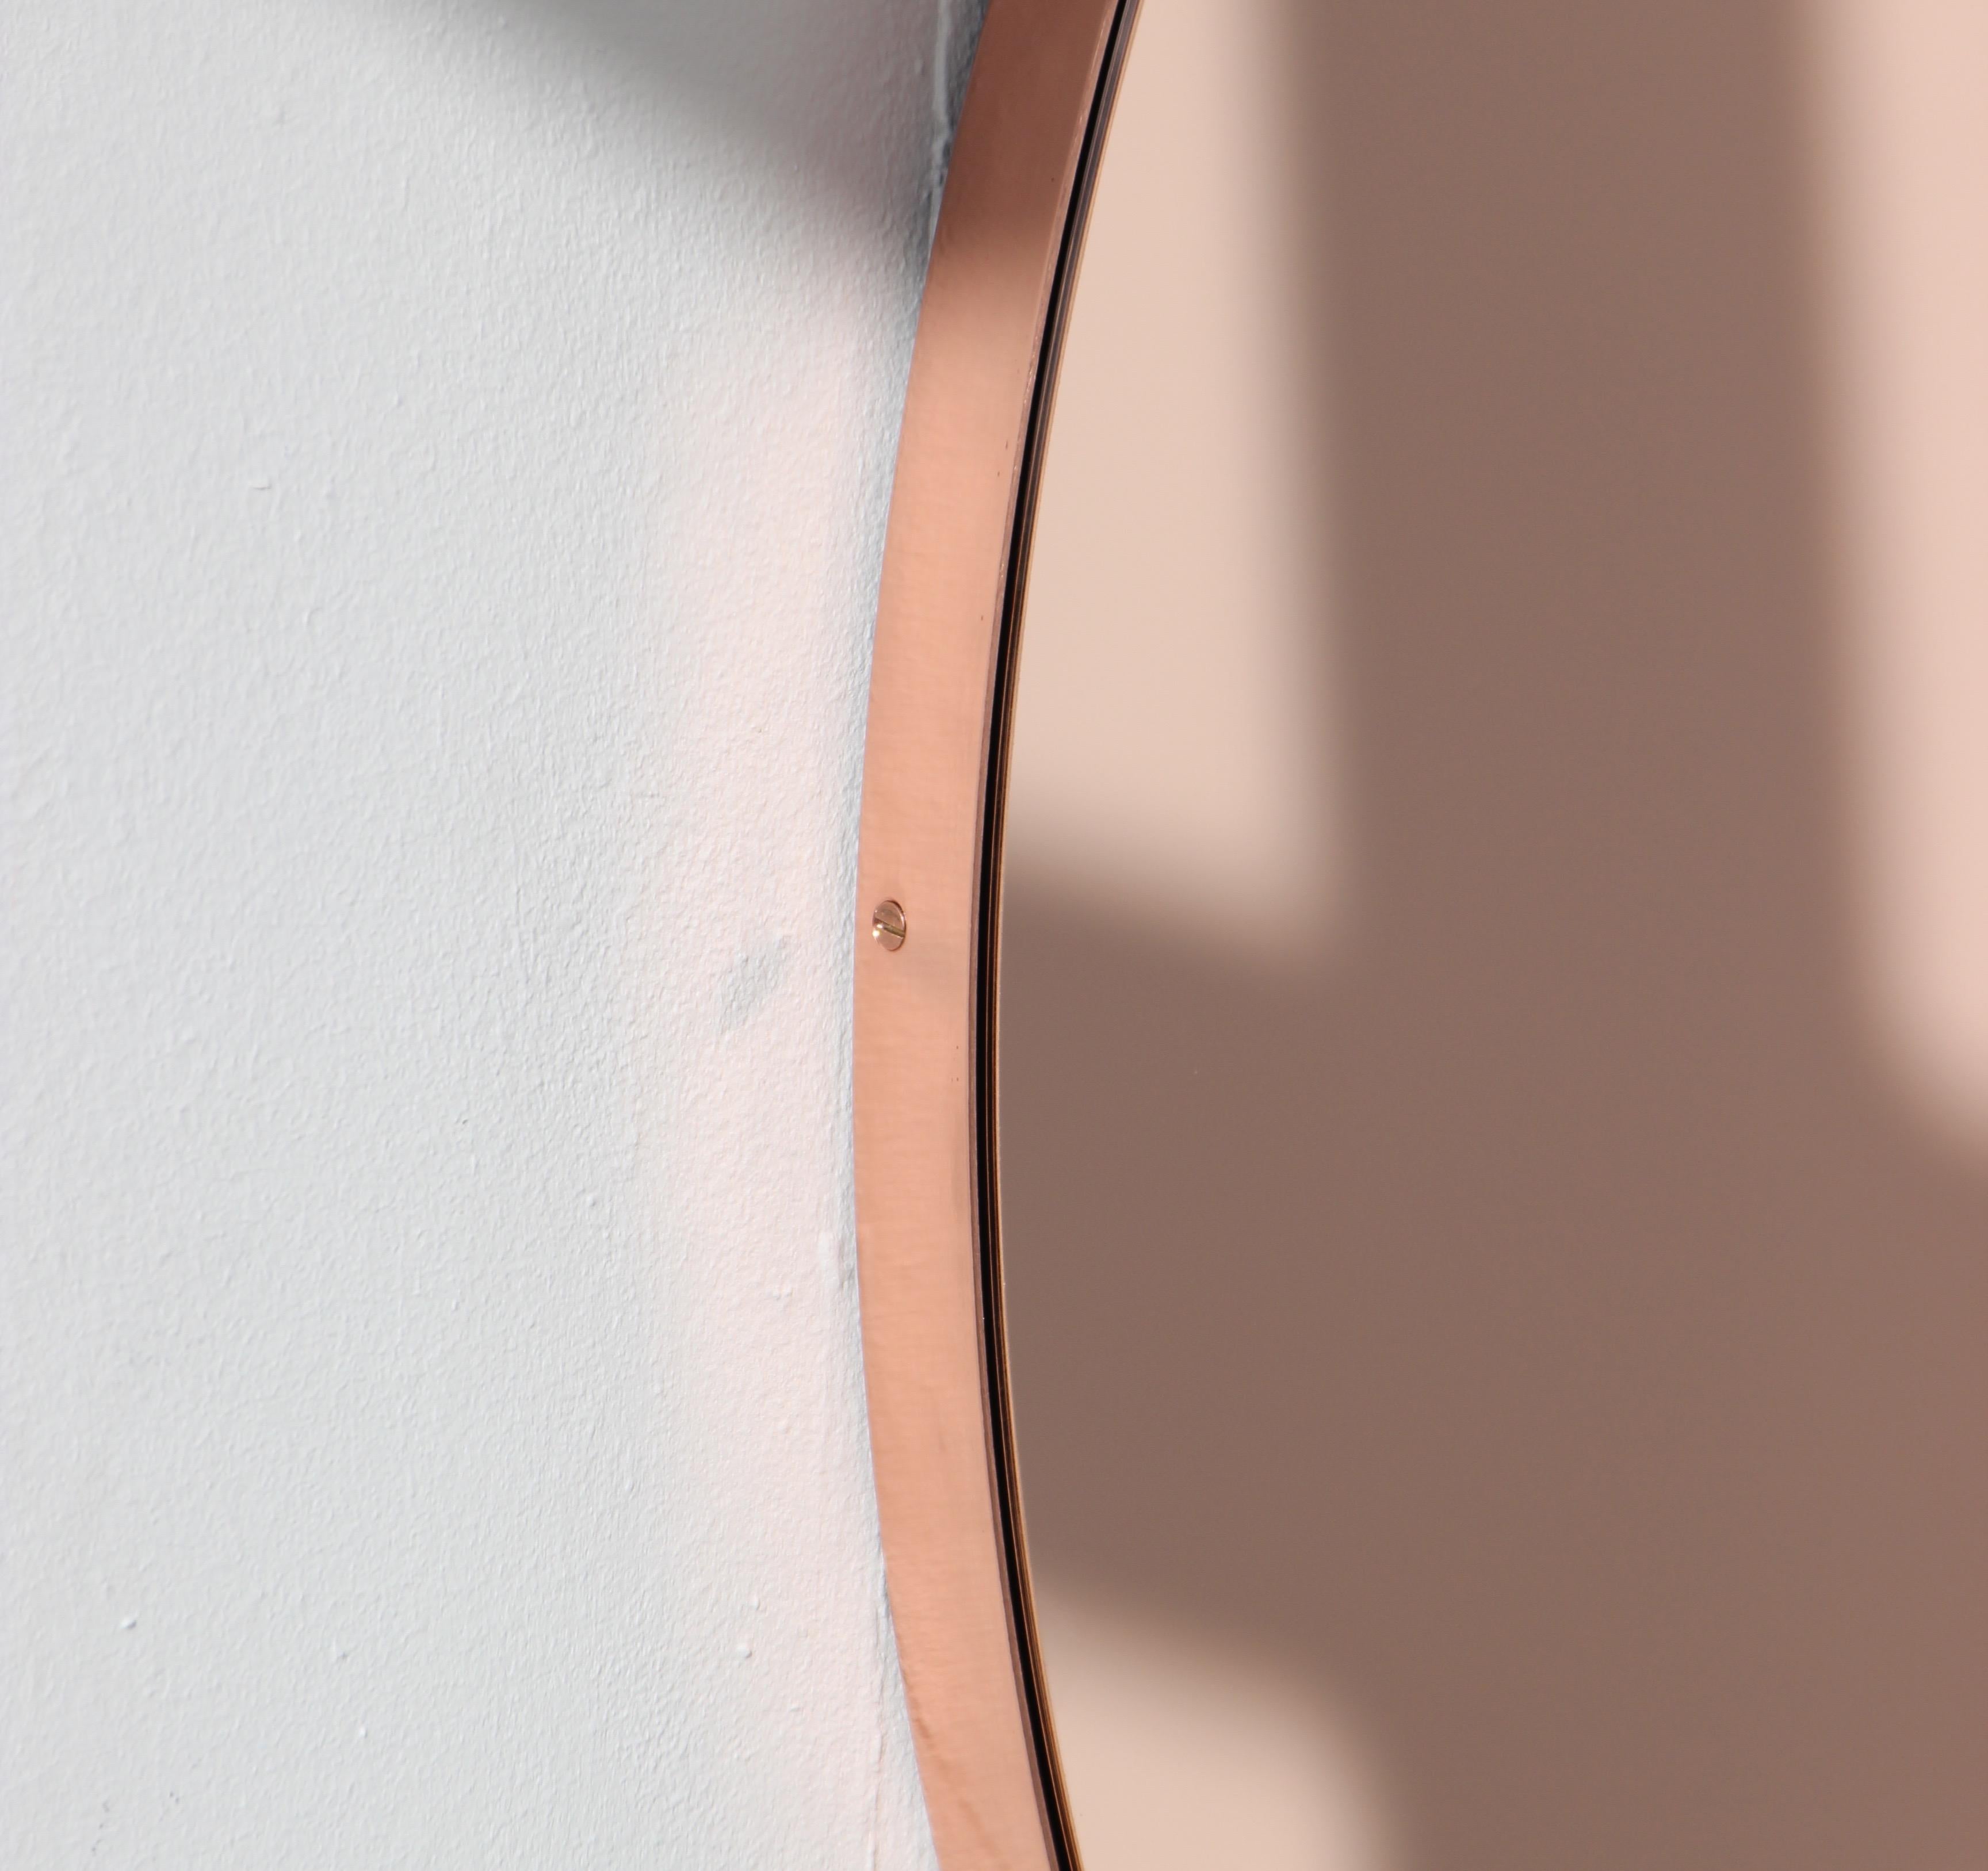 Orbis Rose Gold Tinted Round Minimalist Mirror with Copper Frame, Small In New Condition For Sale In London, GB